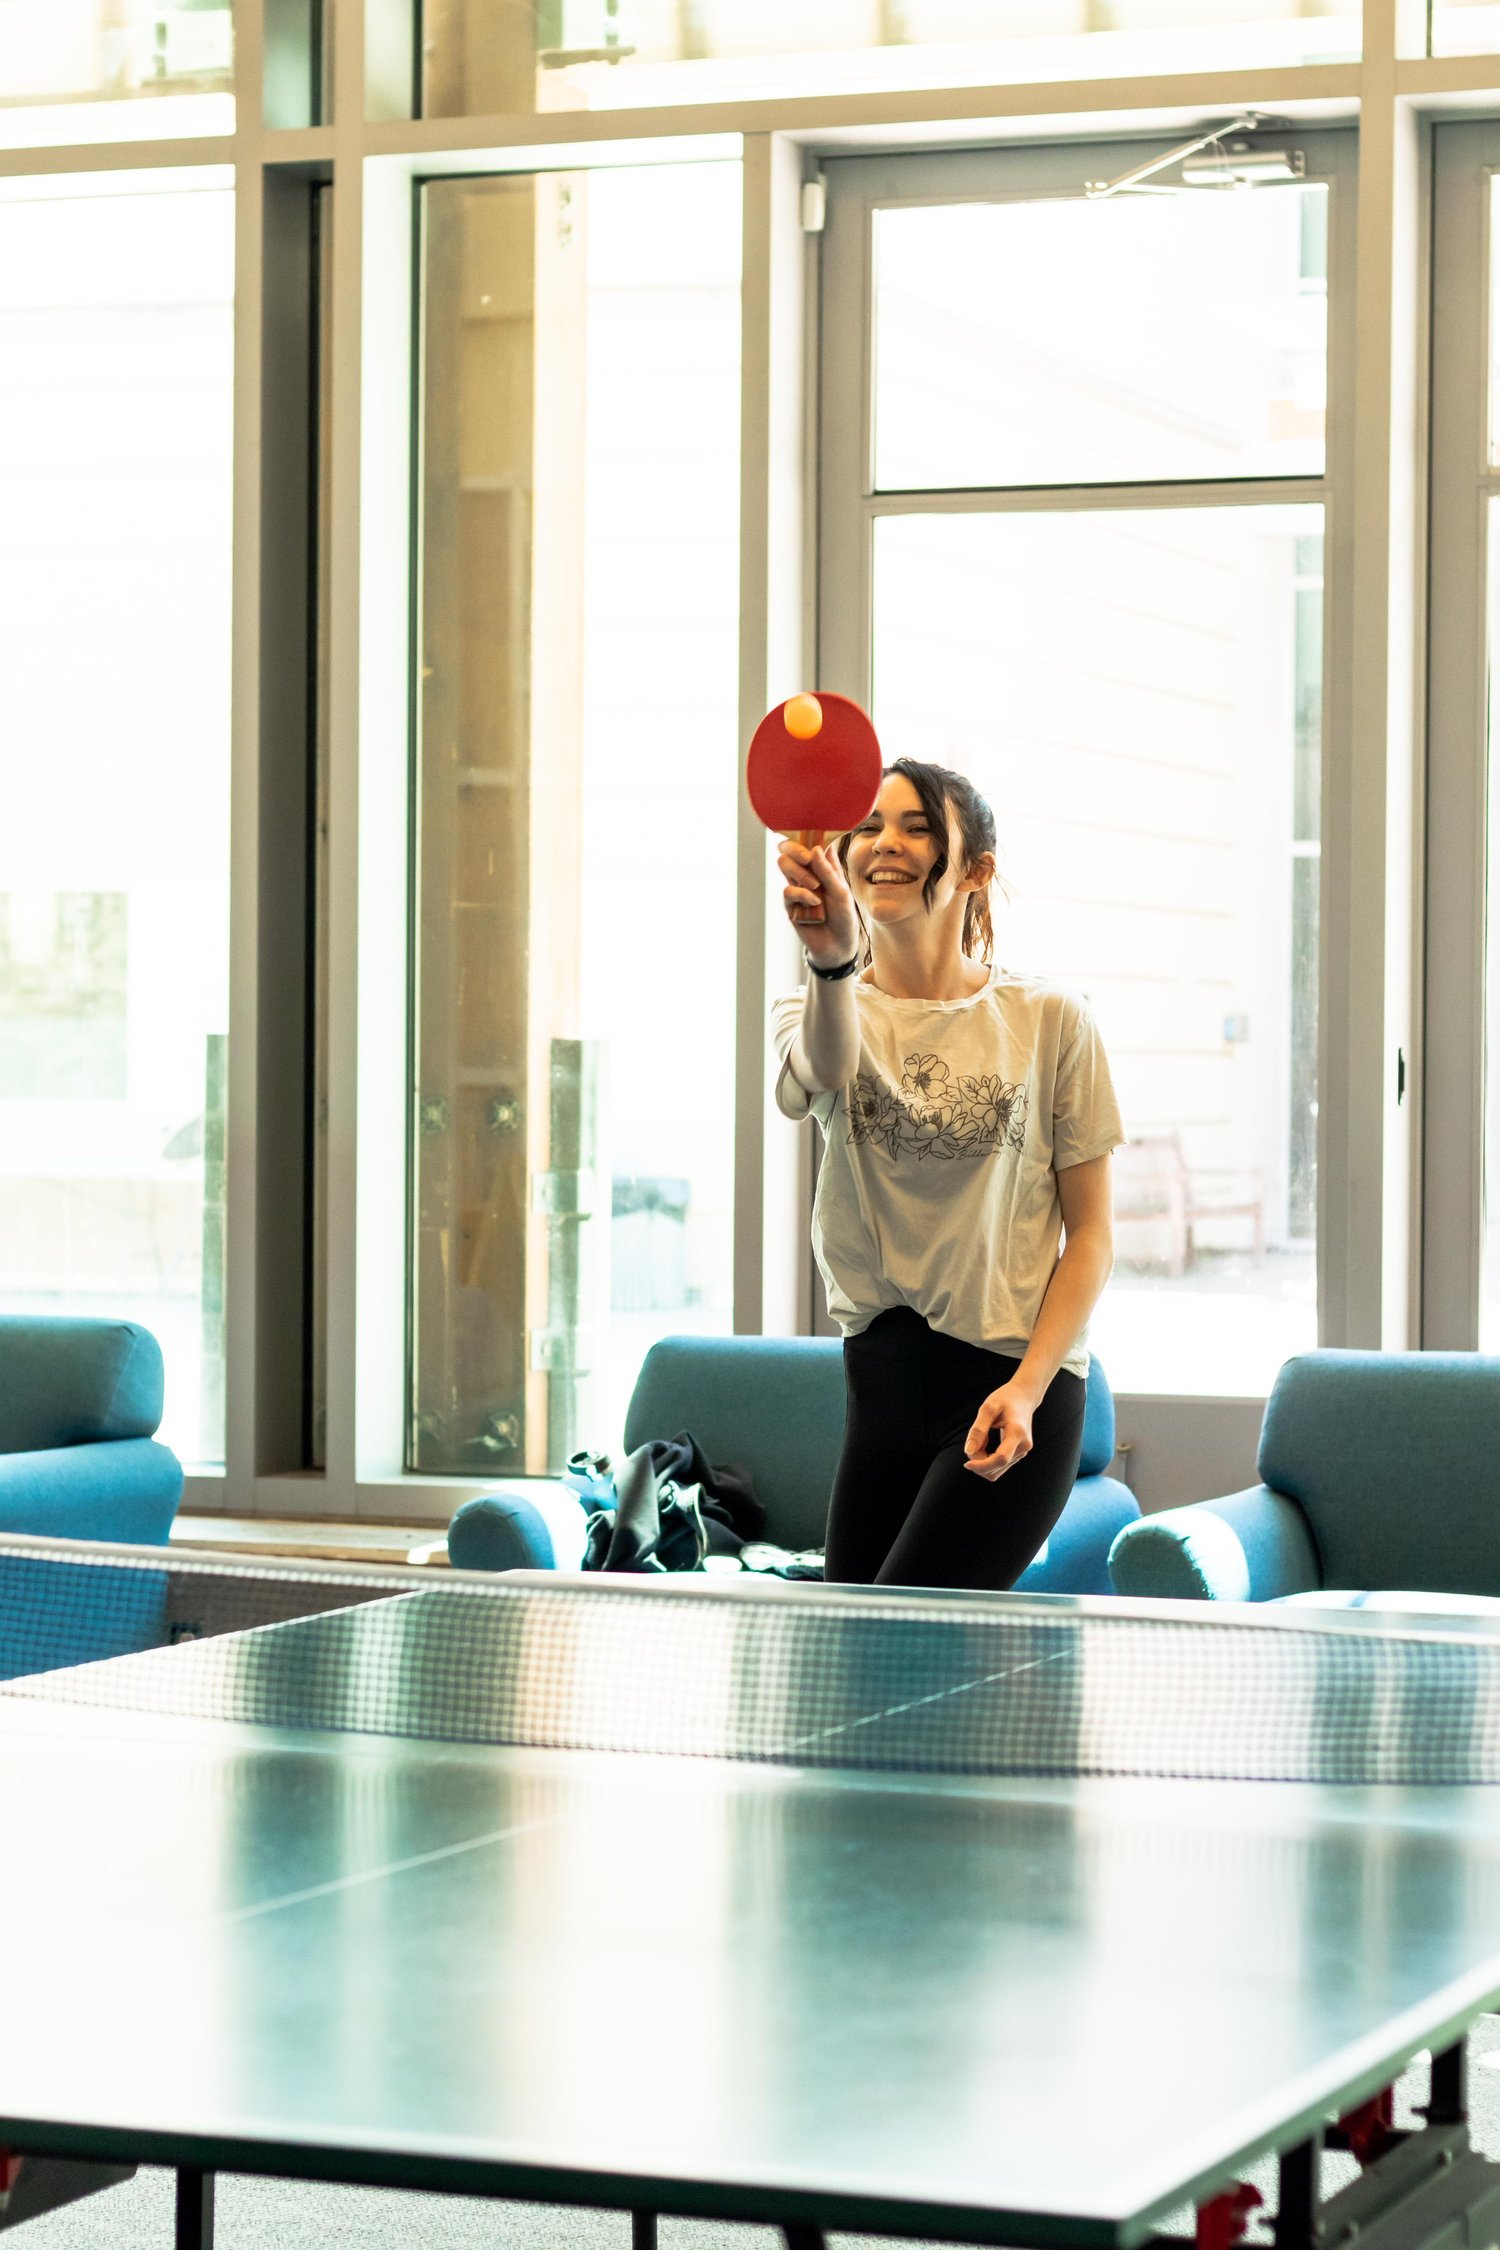 Person smiling while playing table tennis